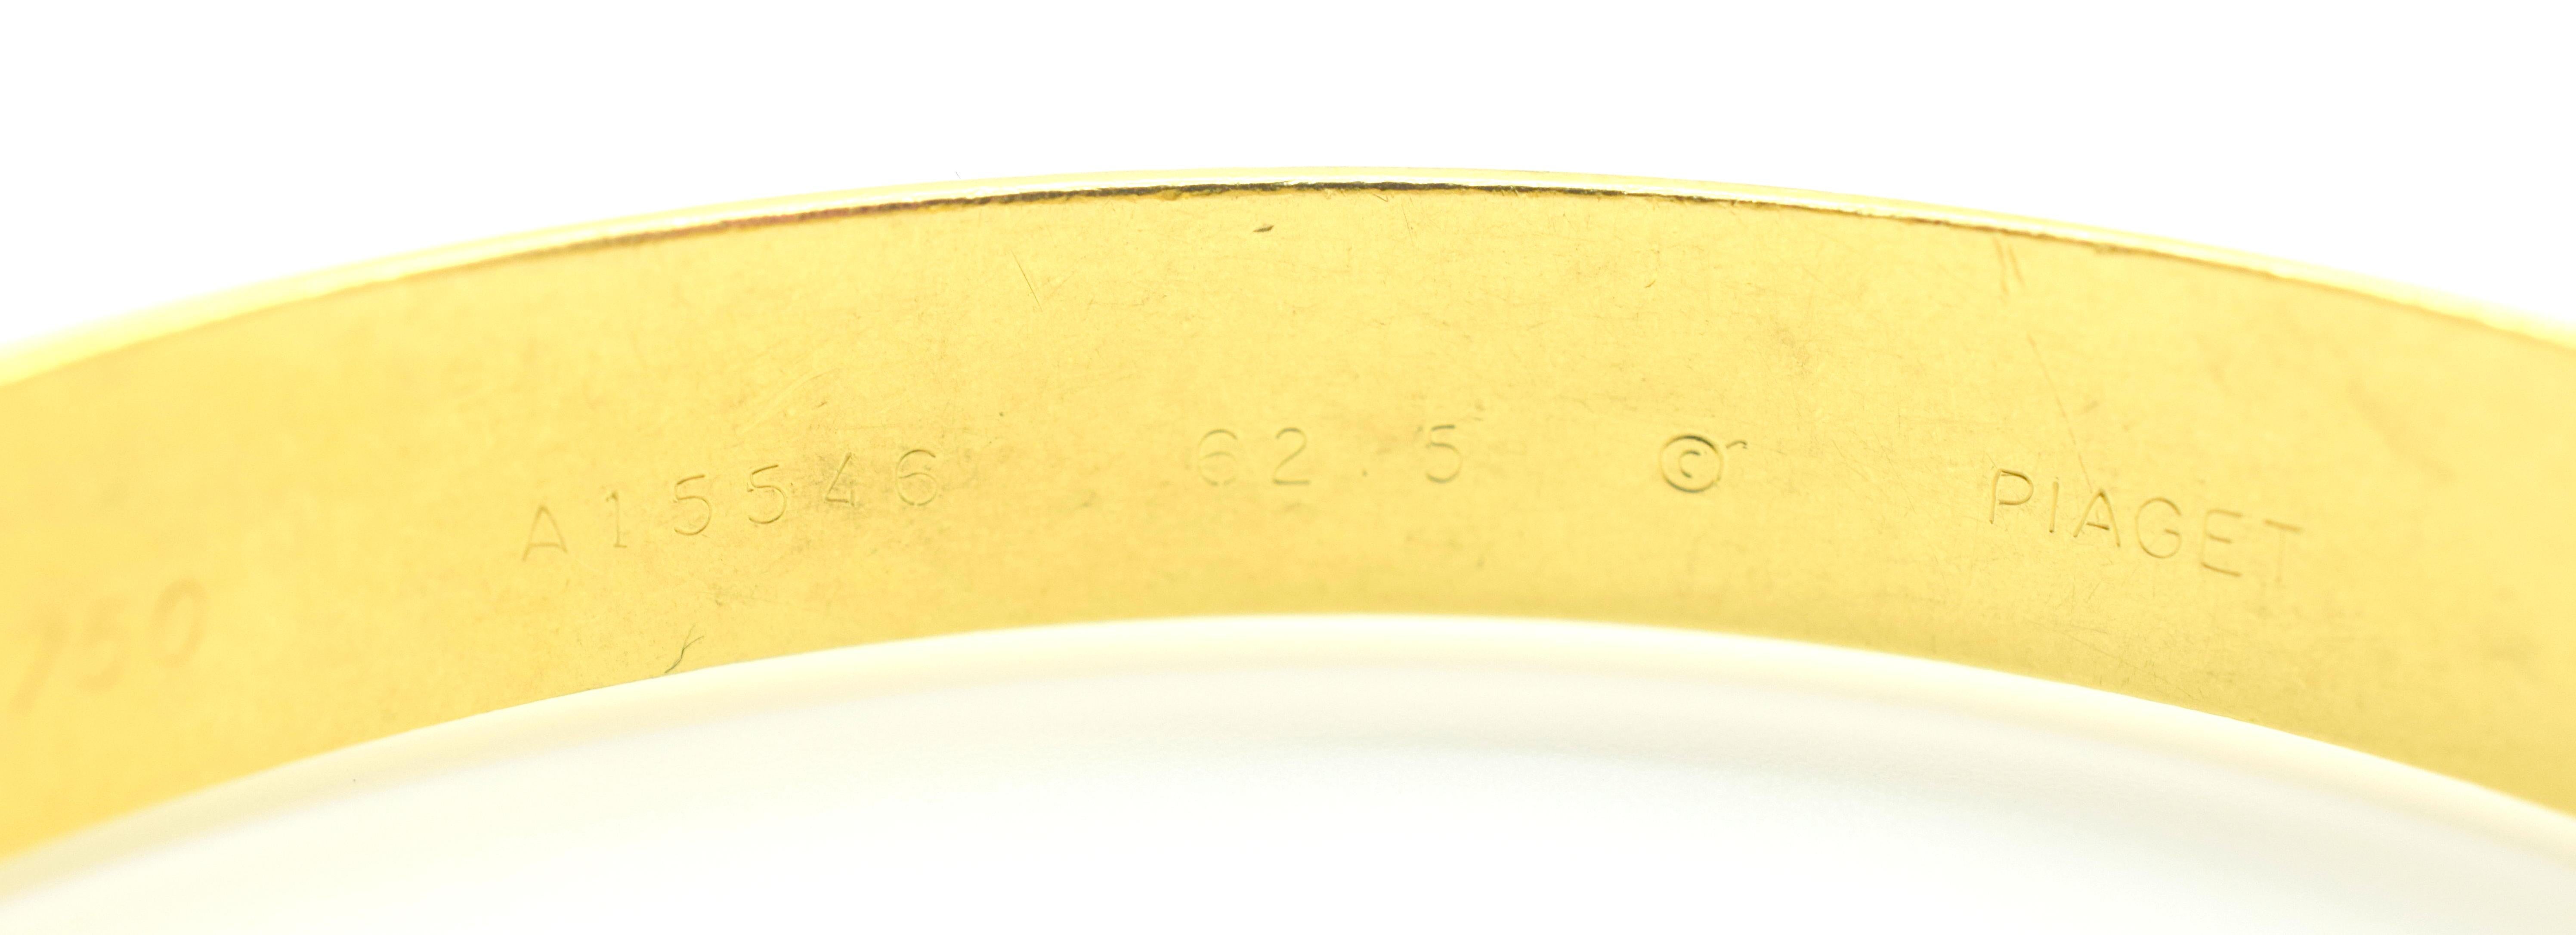 An 18k yellow gold bangle from the Possession collection by Piaget. The bangle has fluted boarders containing one spinning gold ring in the center. The bangle measures 9 mm in width and is 2.5